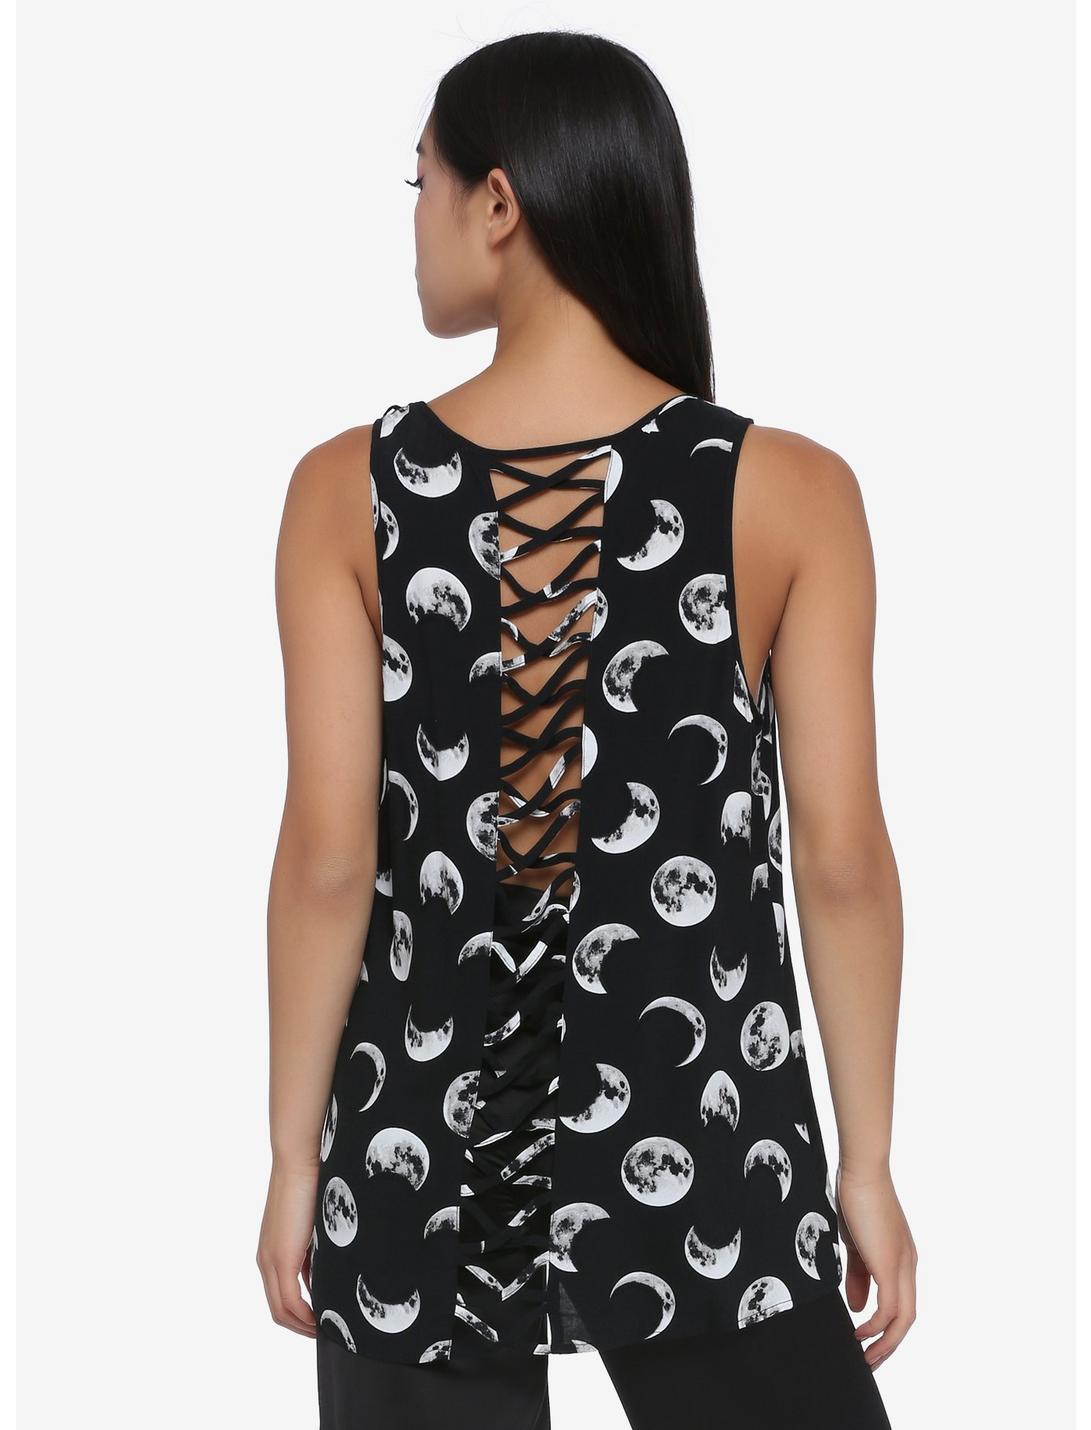 Moon Phases Strappy Back Girls Tank Top, MULTI, hi-res